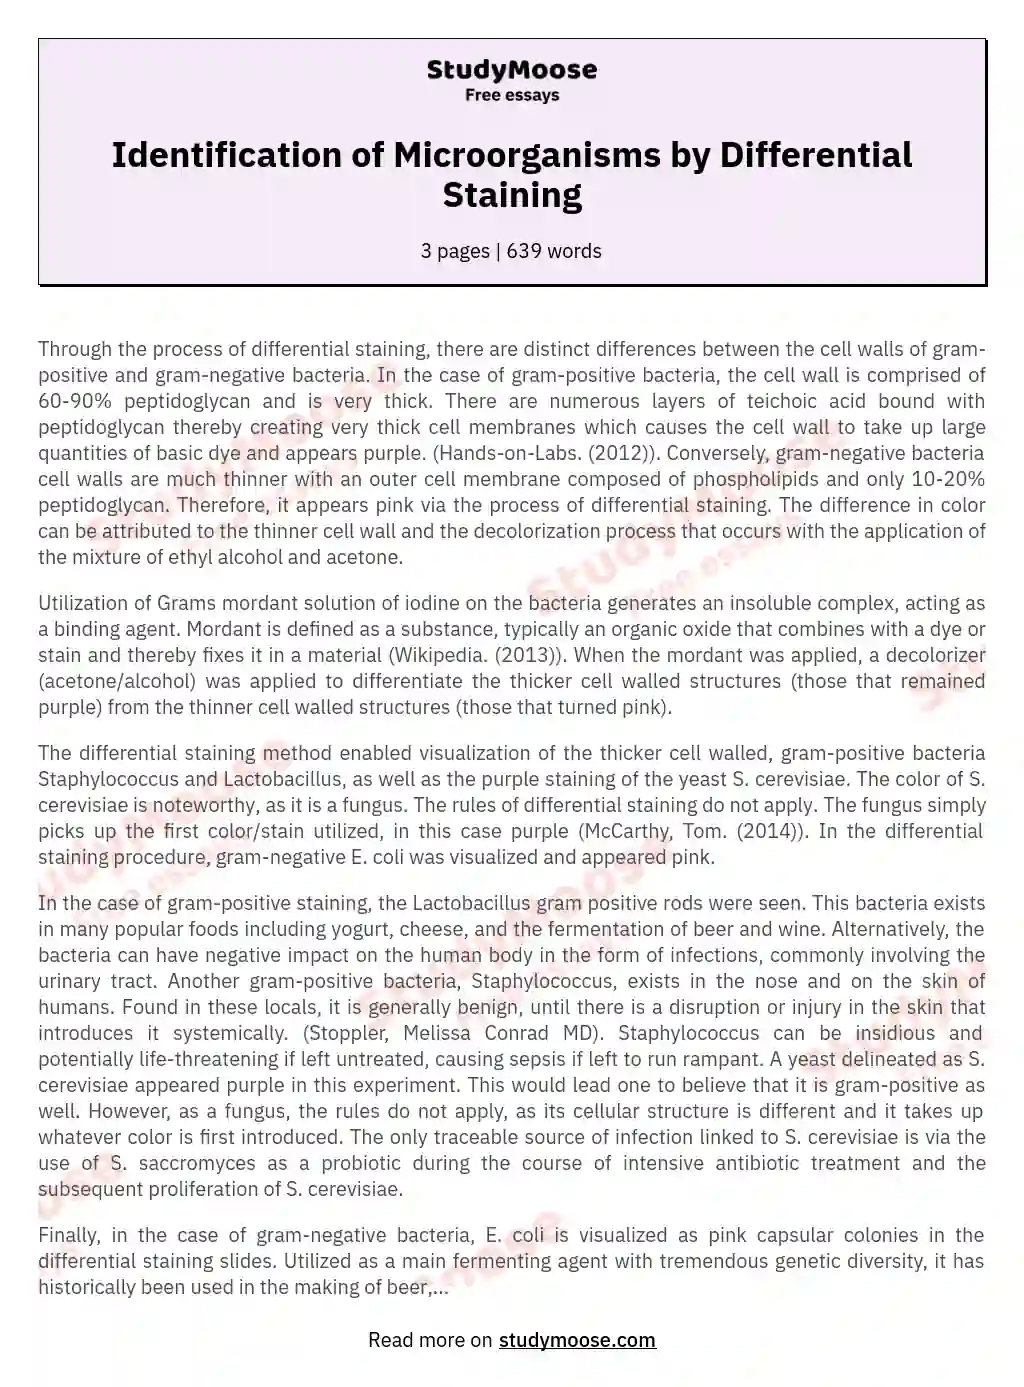 Identification of Microorganisms by Differential Staining essay